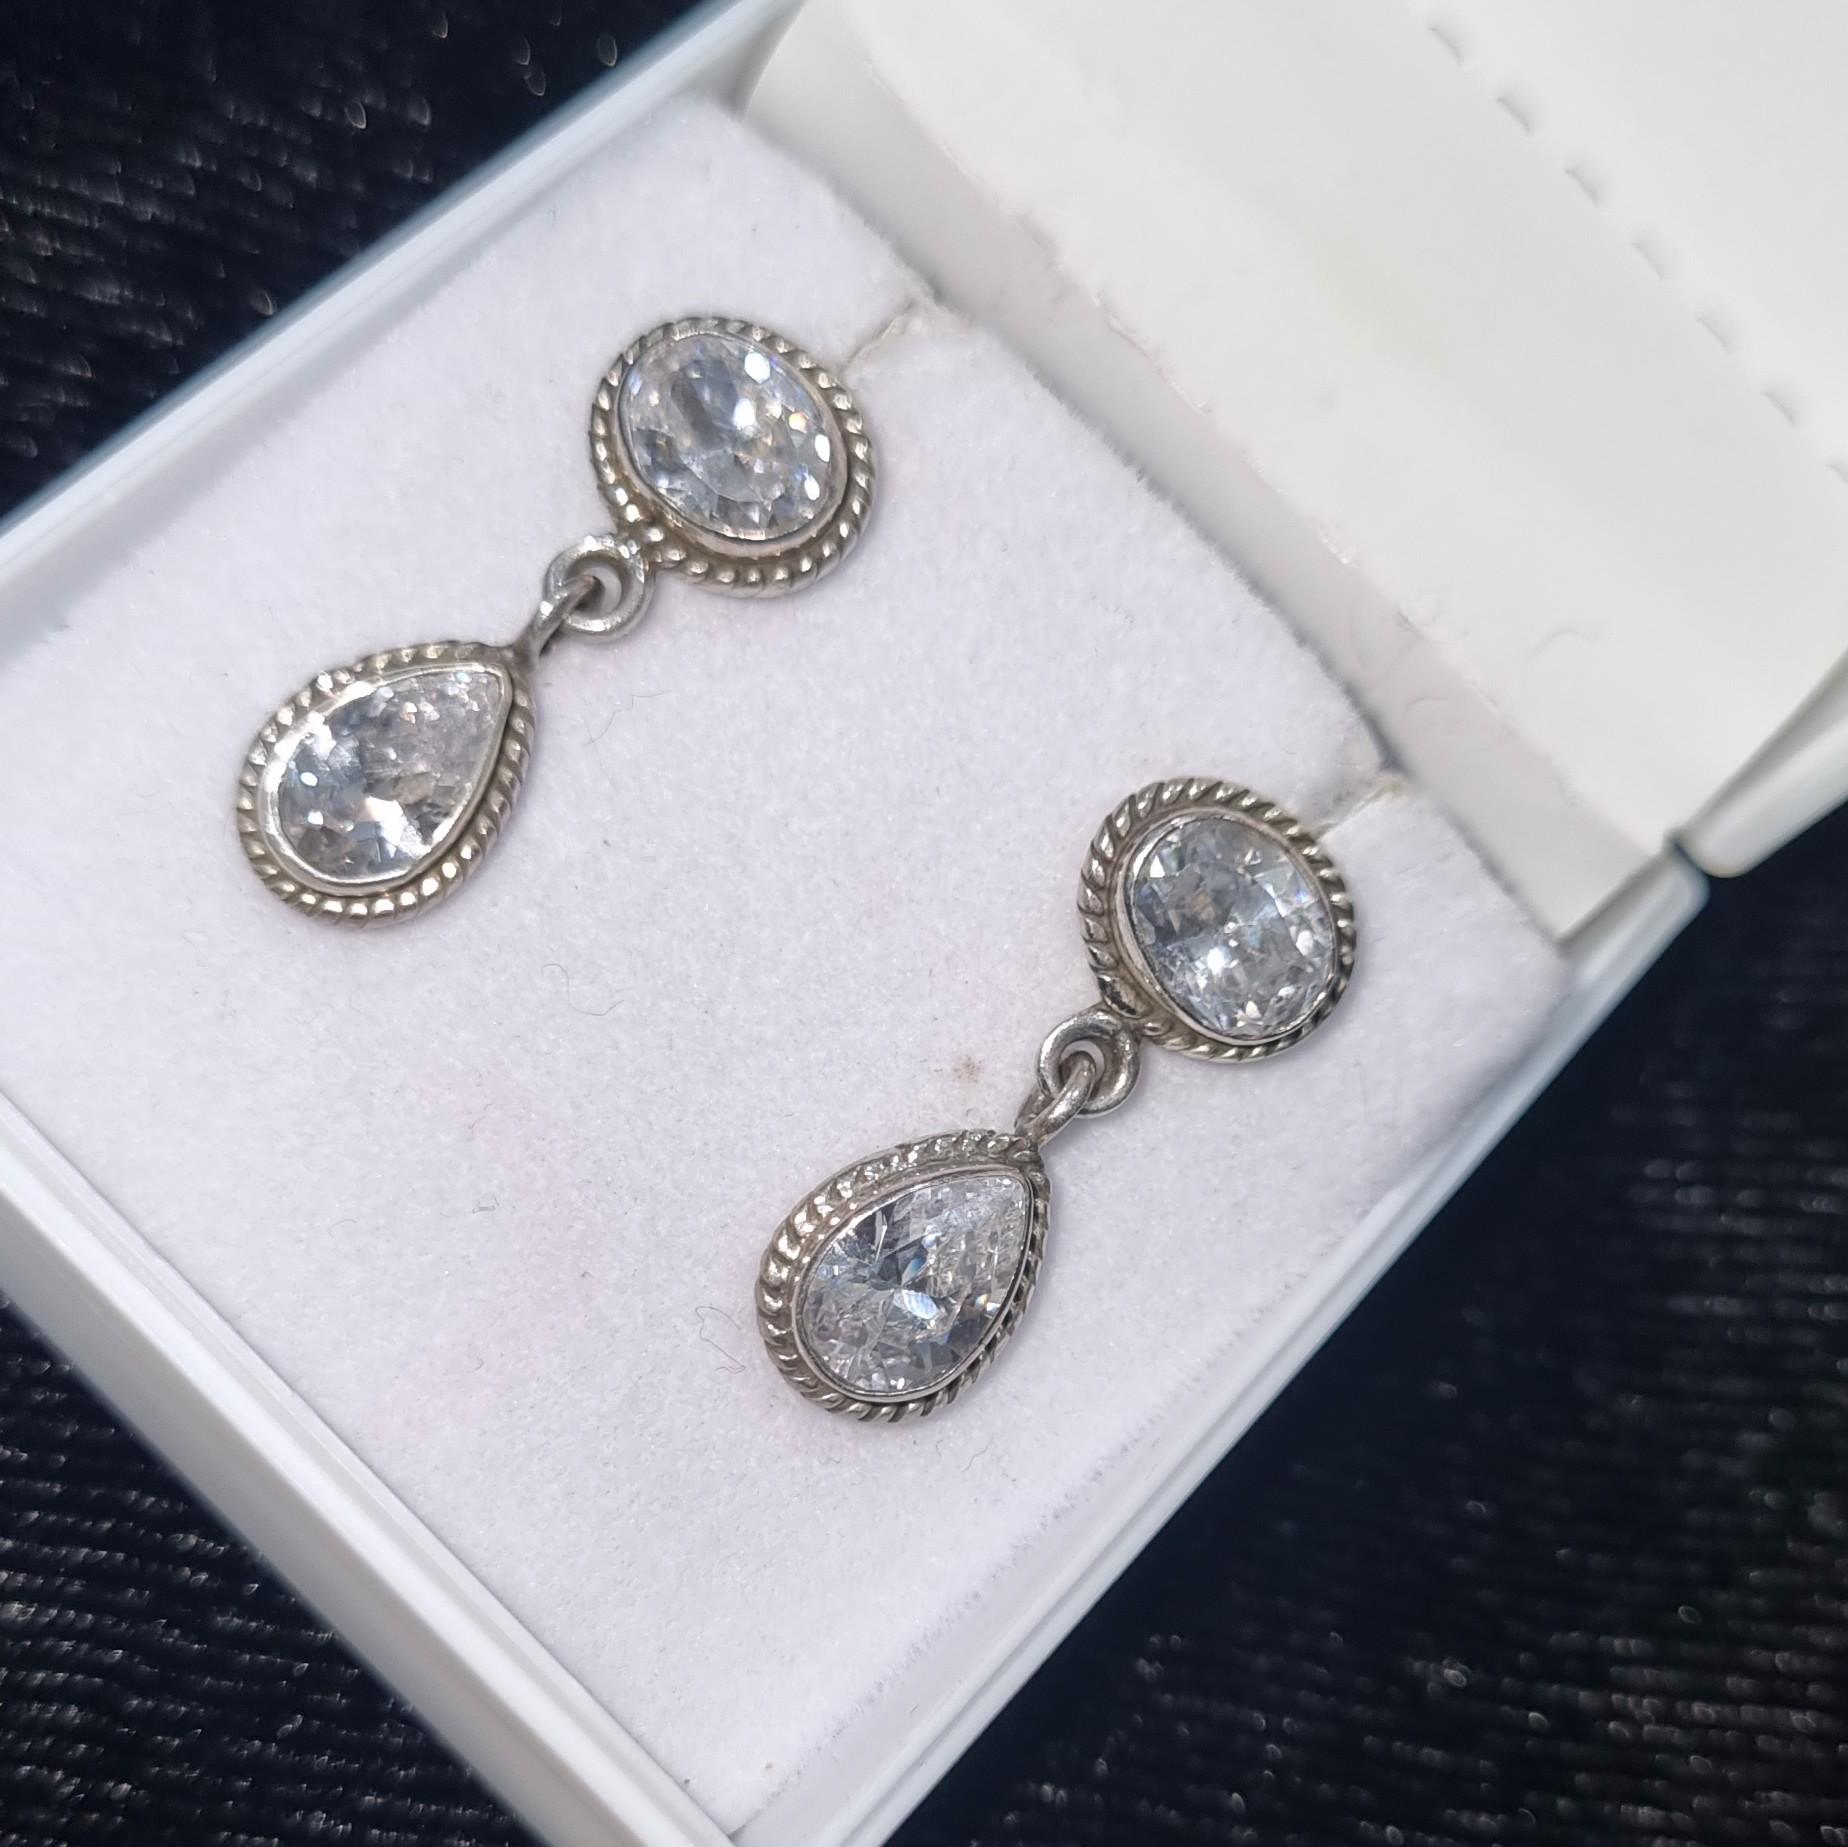 Elevate your style with our exquisite Sterling Silver Stud Earrings featuring a stunning combination of oval and drop-cut cubic zirconia diamonds. Crafted with precision and elegance, these earrings are a timeless addition to your jewelry